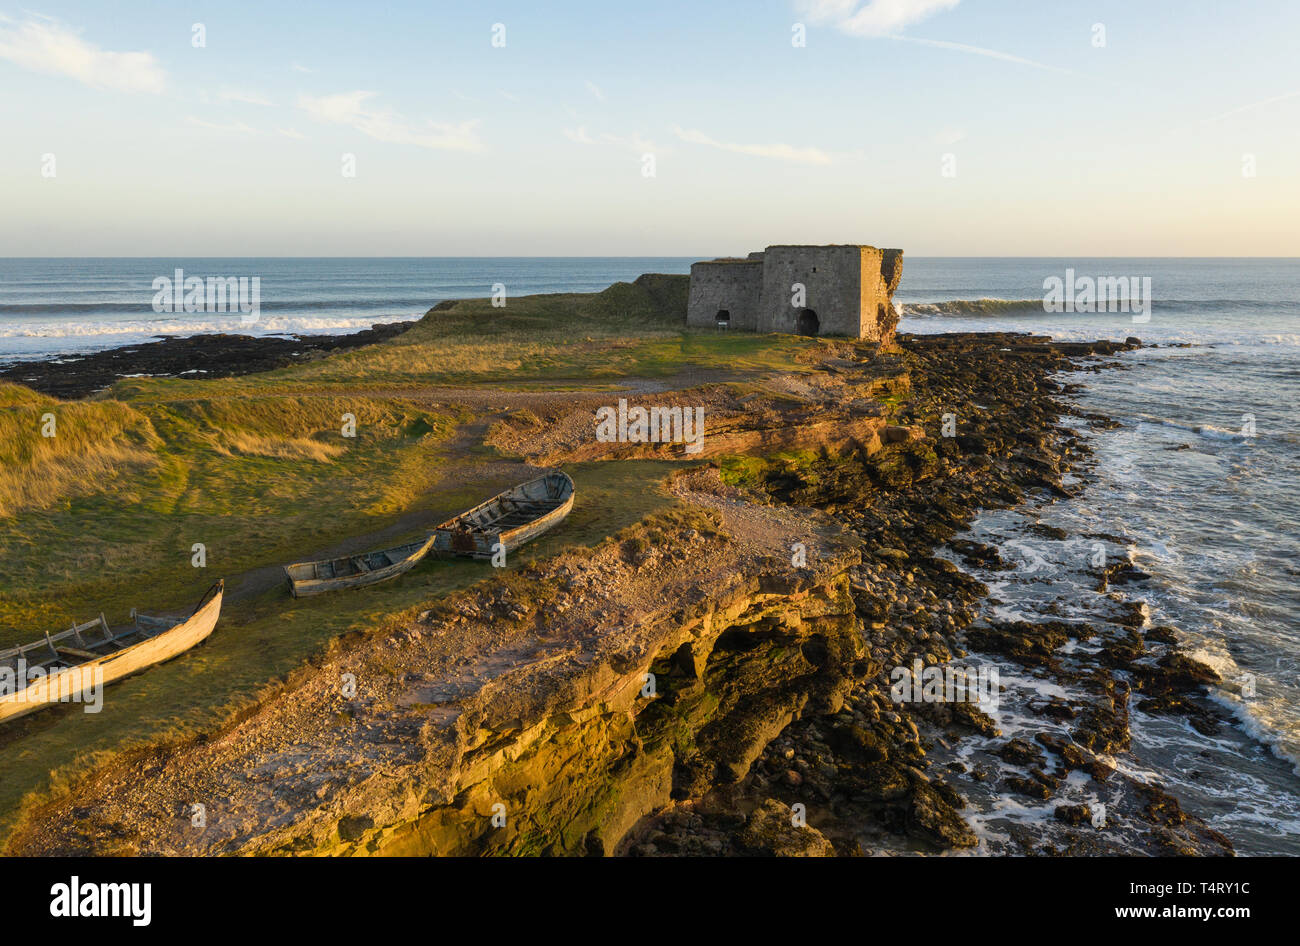 The lime kiln at Boddin Point north east of Lunan Bay, Angus, Scotland Stock Photo